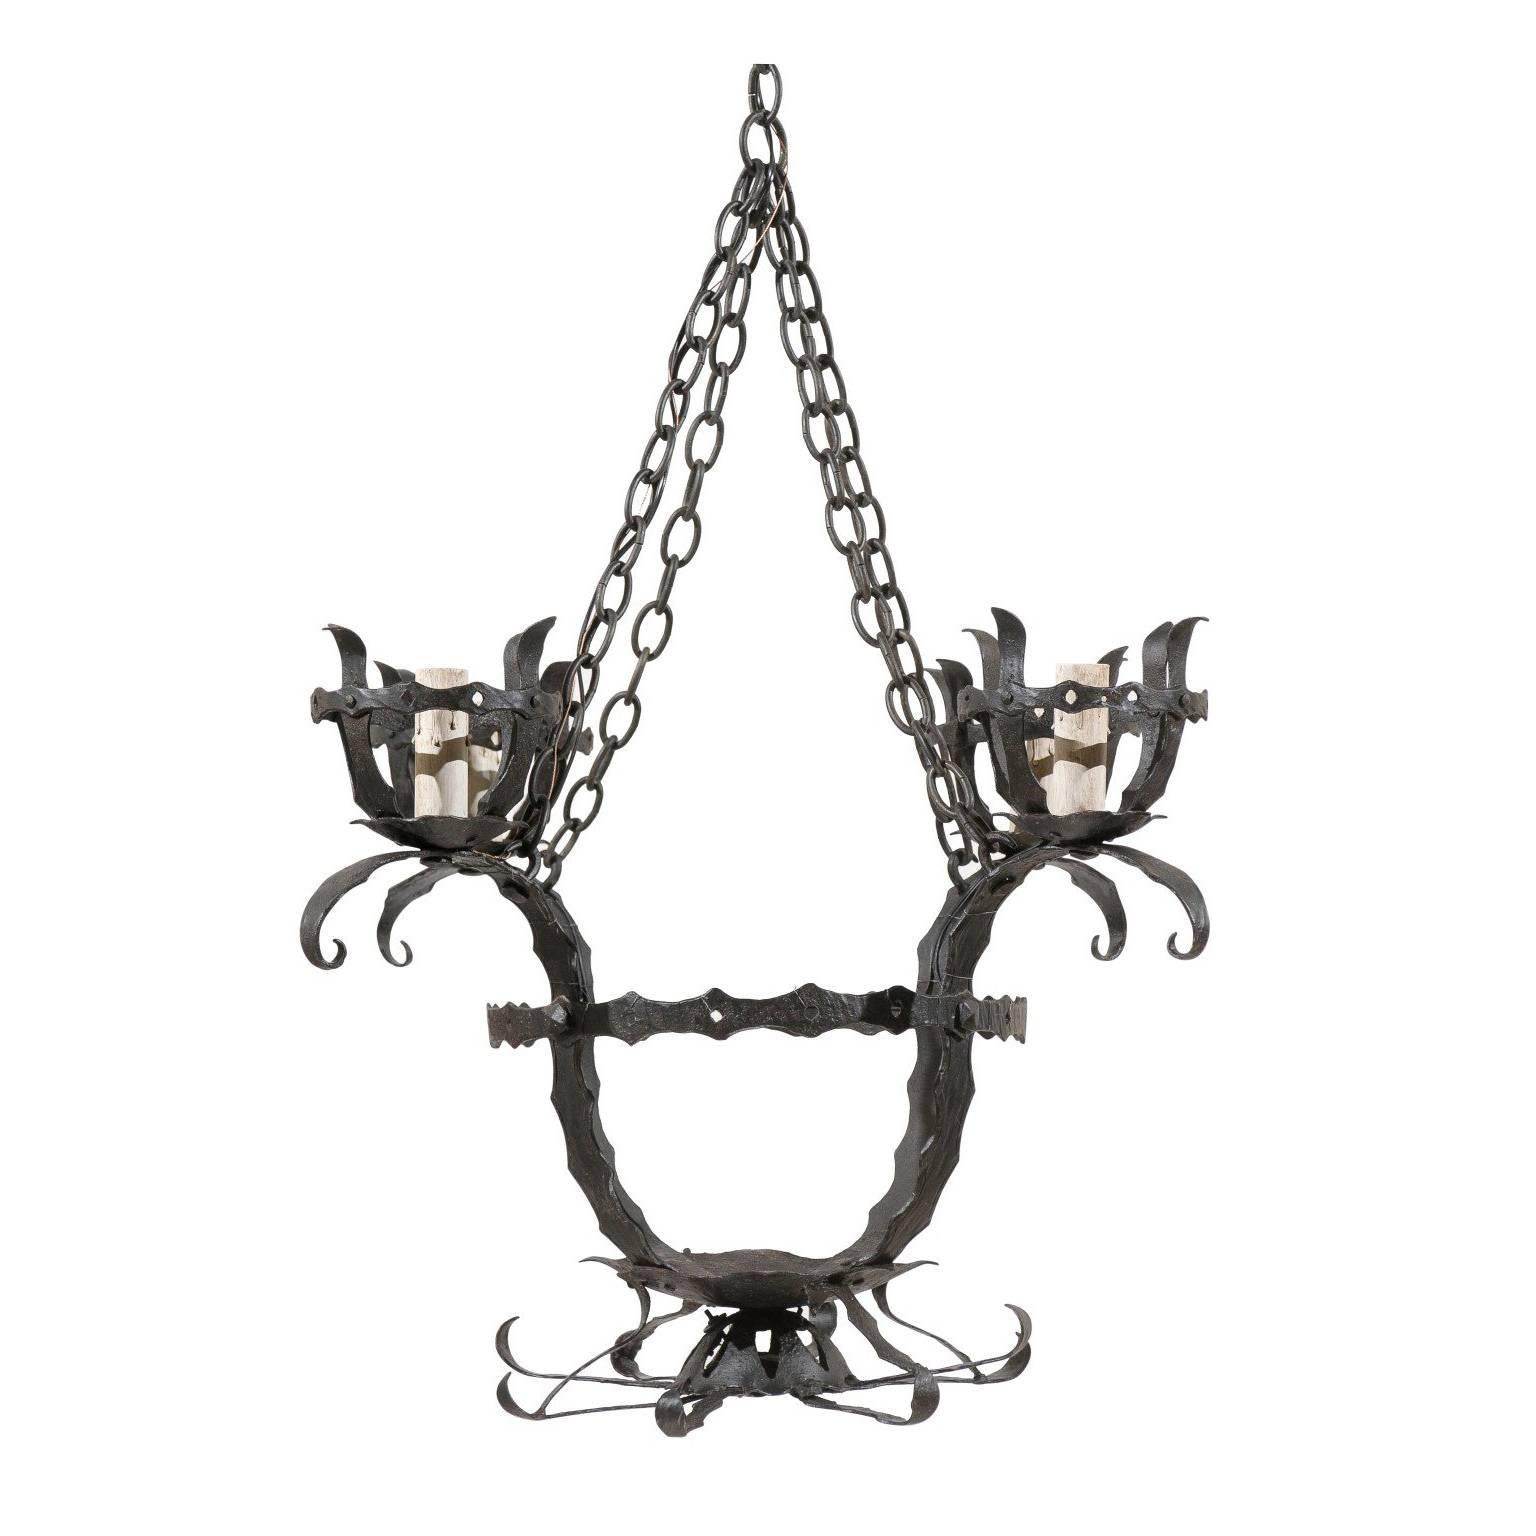 Italian Black Hammered-Iron 4 Light Basket Style Hanging Light Fixture, Re-Wired For Sale